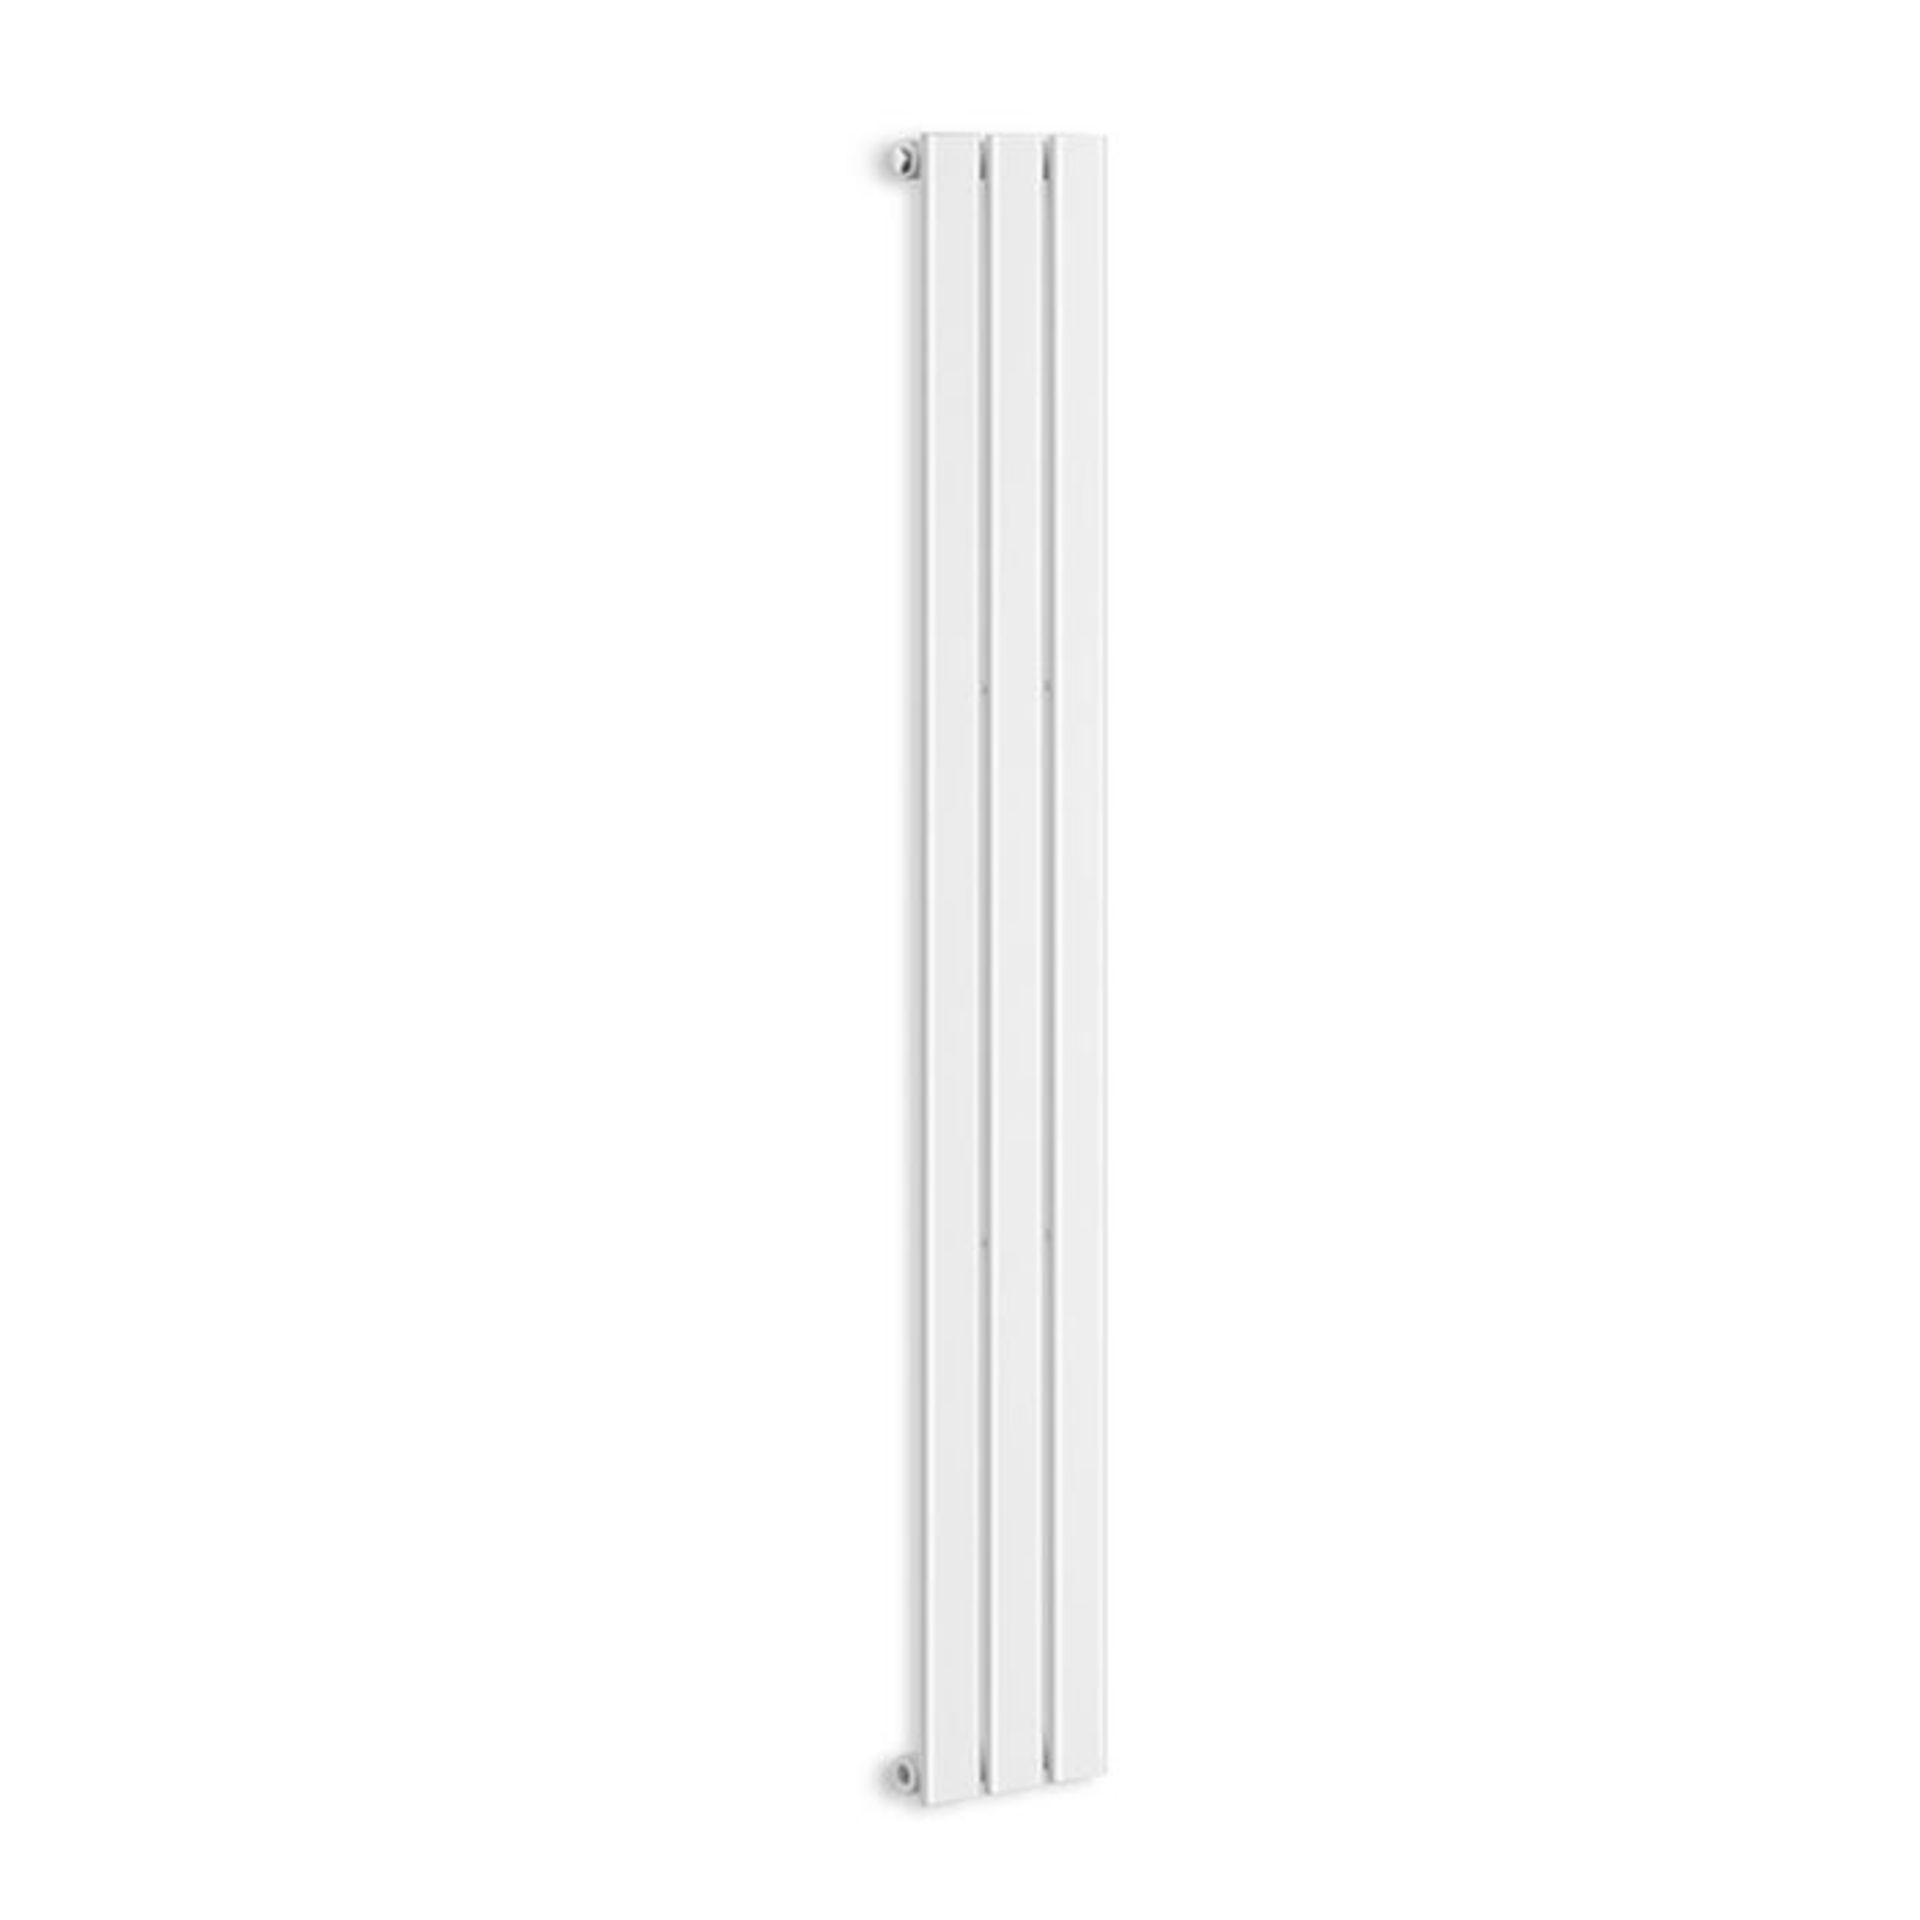 (MC97) 1600x228mm White Panel Vertical Radiator. RRP £209.00. Made from low carbon steel with a high